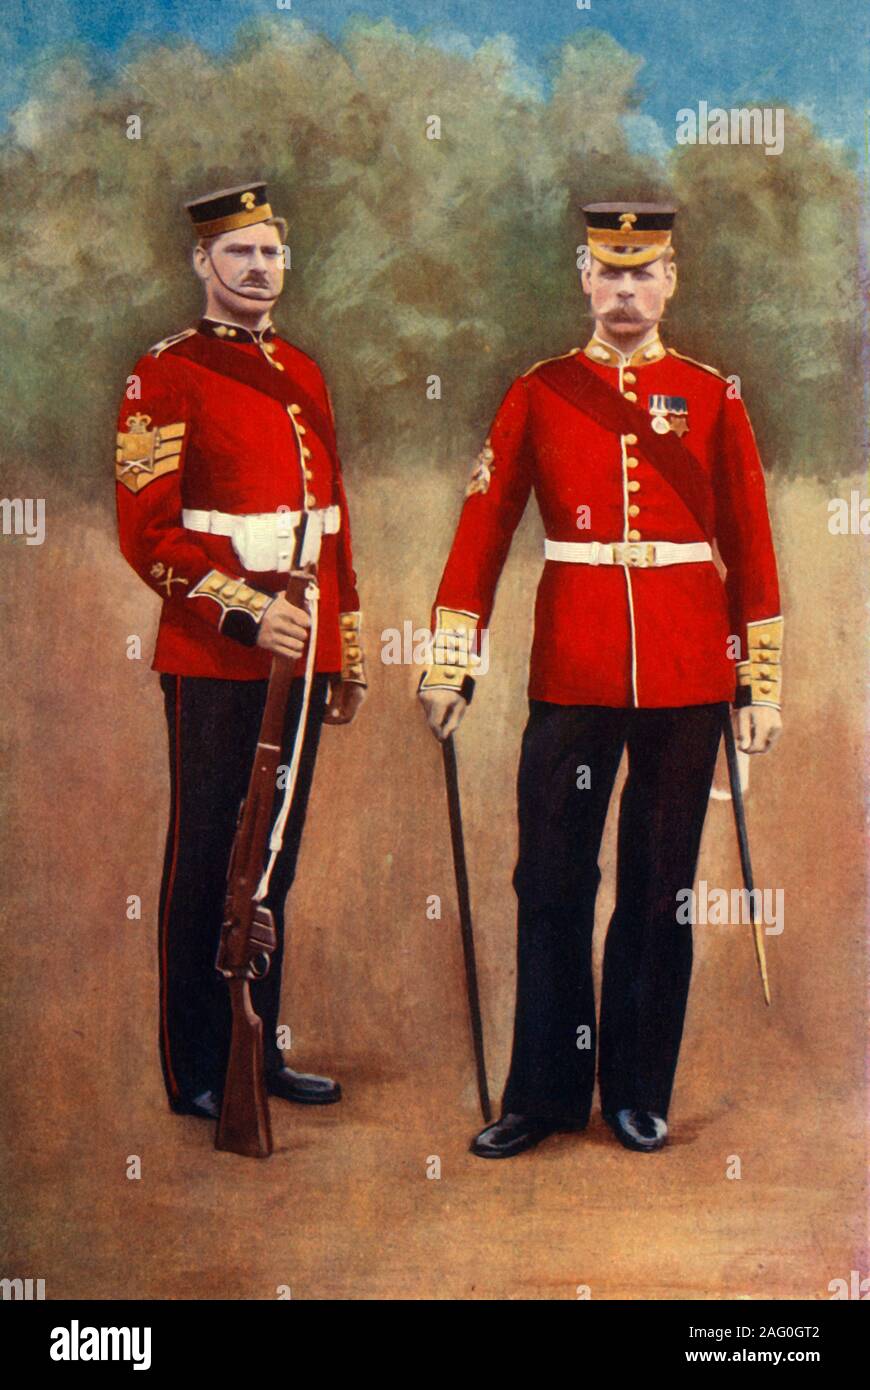 'The Grenadier Guards (Colour-Sergeant &amp; Sergeant-Major)', 1901. The Grenadier Guard, an infantry regiment of the British Army were deployed to South Africa, where they took part in the Battle of Modder River and the Battle of Belmont.  From &quot;South Africa and the Transvaal War, Vol. VI&quot;, by Louis Creswicke. [T. C. &amp; E. C. Jack, Edinburgh, 1901] Stock Photo